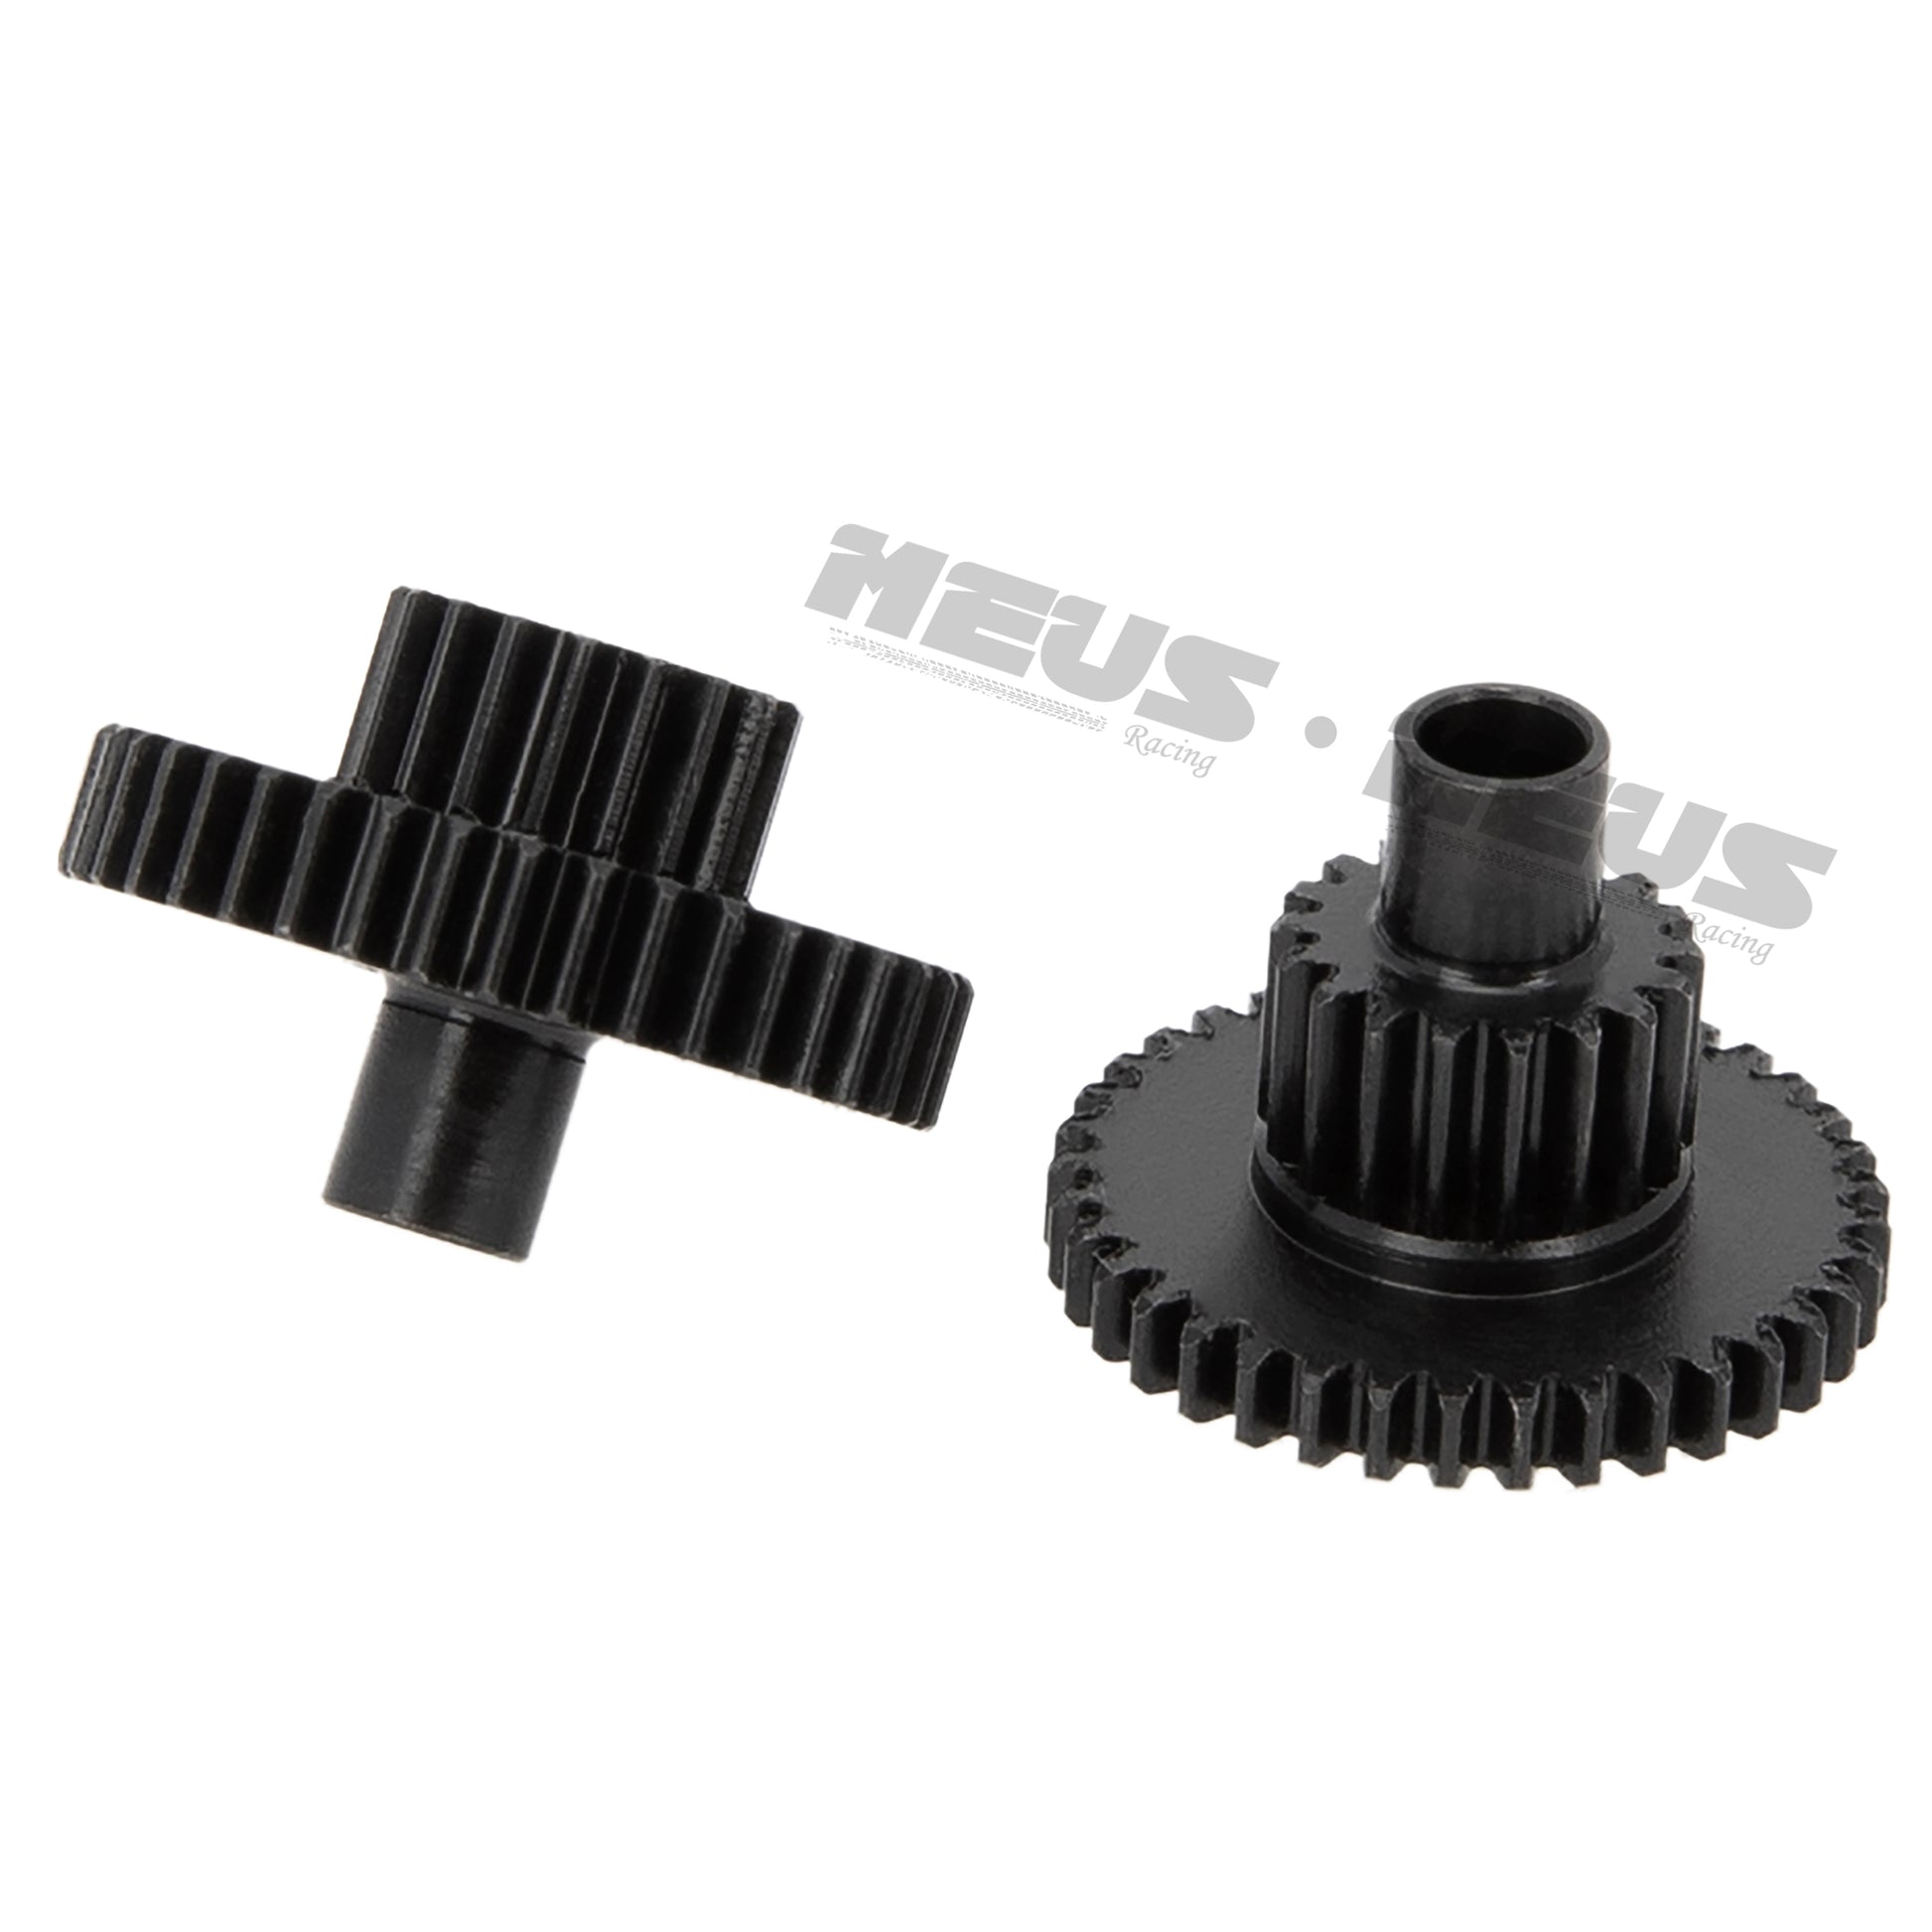 16.61:1 Transmission gears for TRX4M